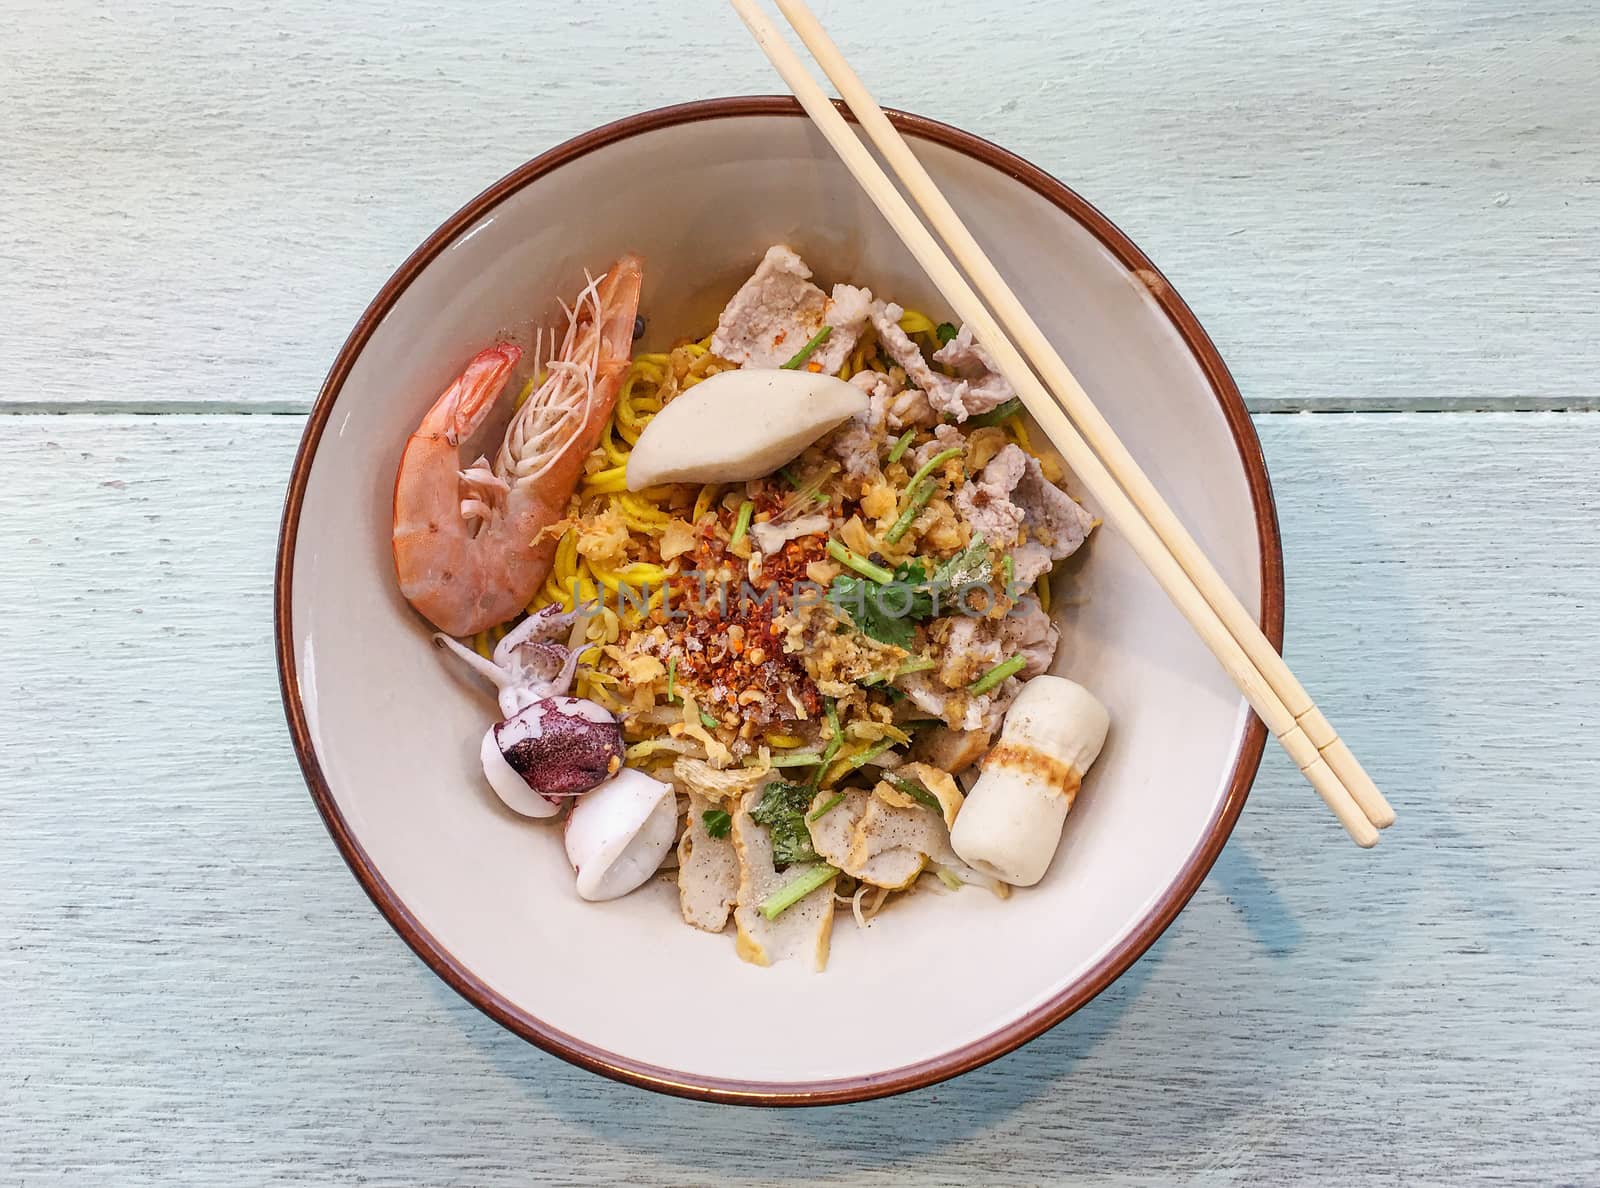 Noodle in a bowl, with shrimp, and squid, and chili, and vegetable, on wooden table, blurred background